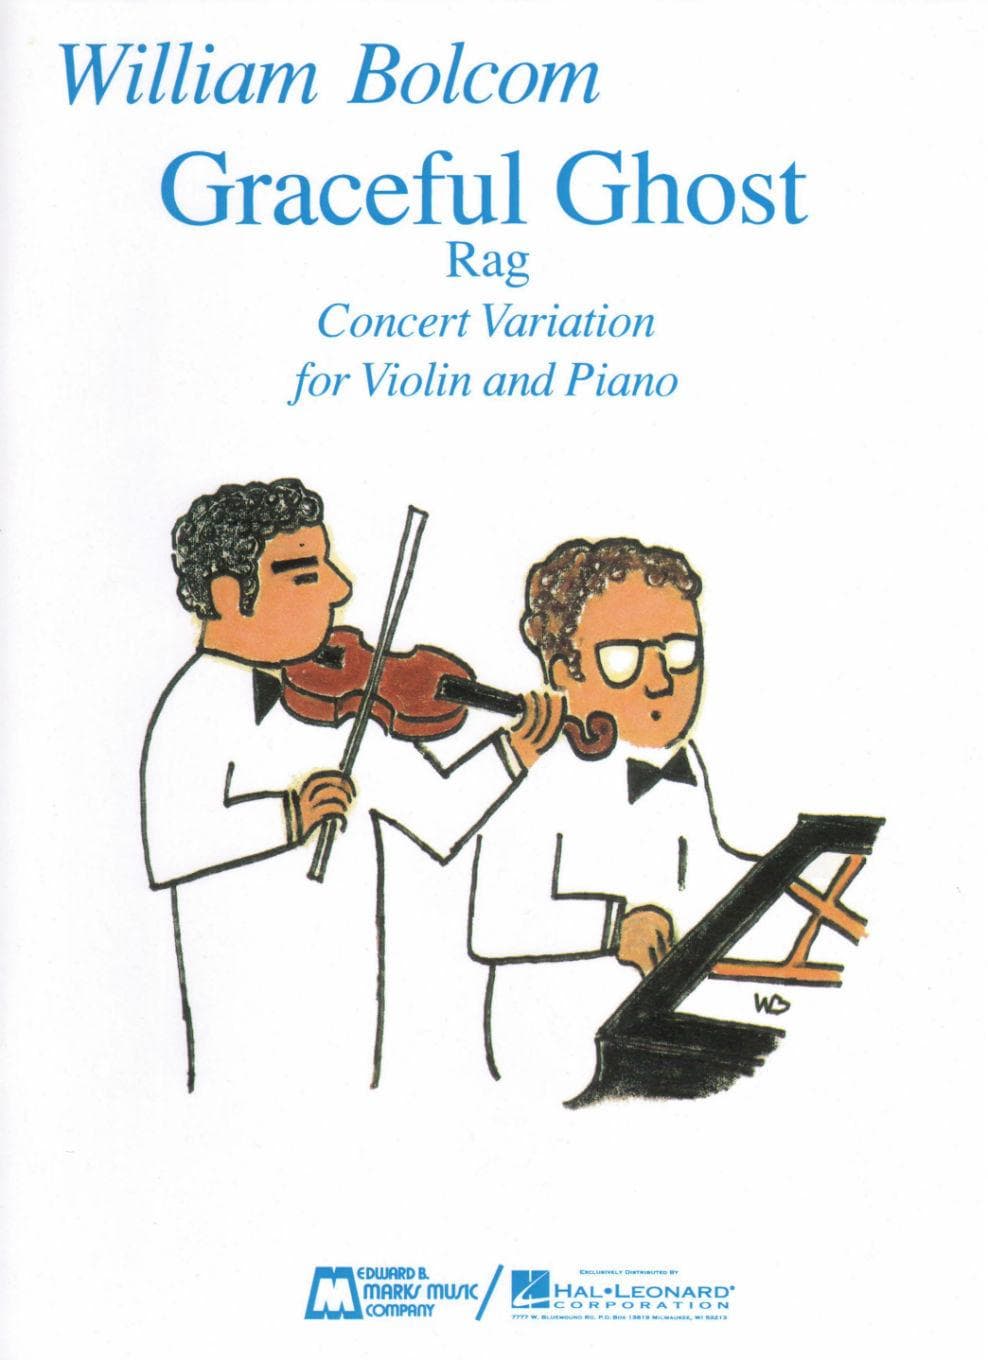 Bolcom, William - Graceful Ghost Rag Concert Variation for Violin and Piano - published by Edward B Marks Music